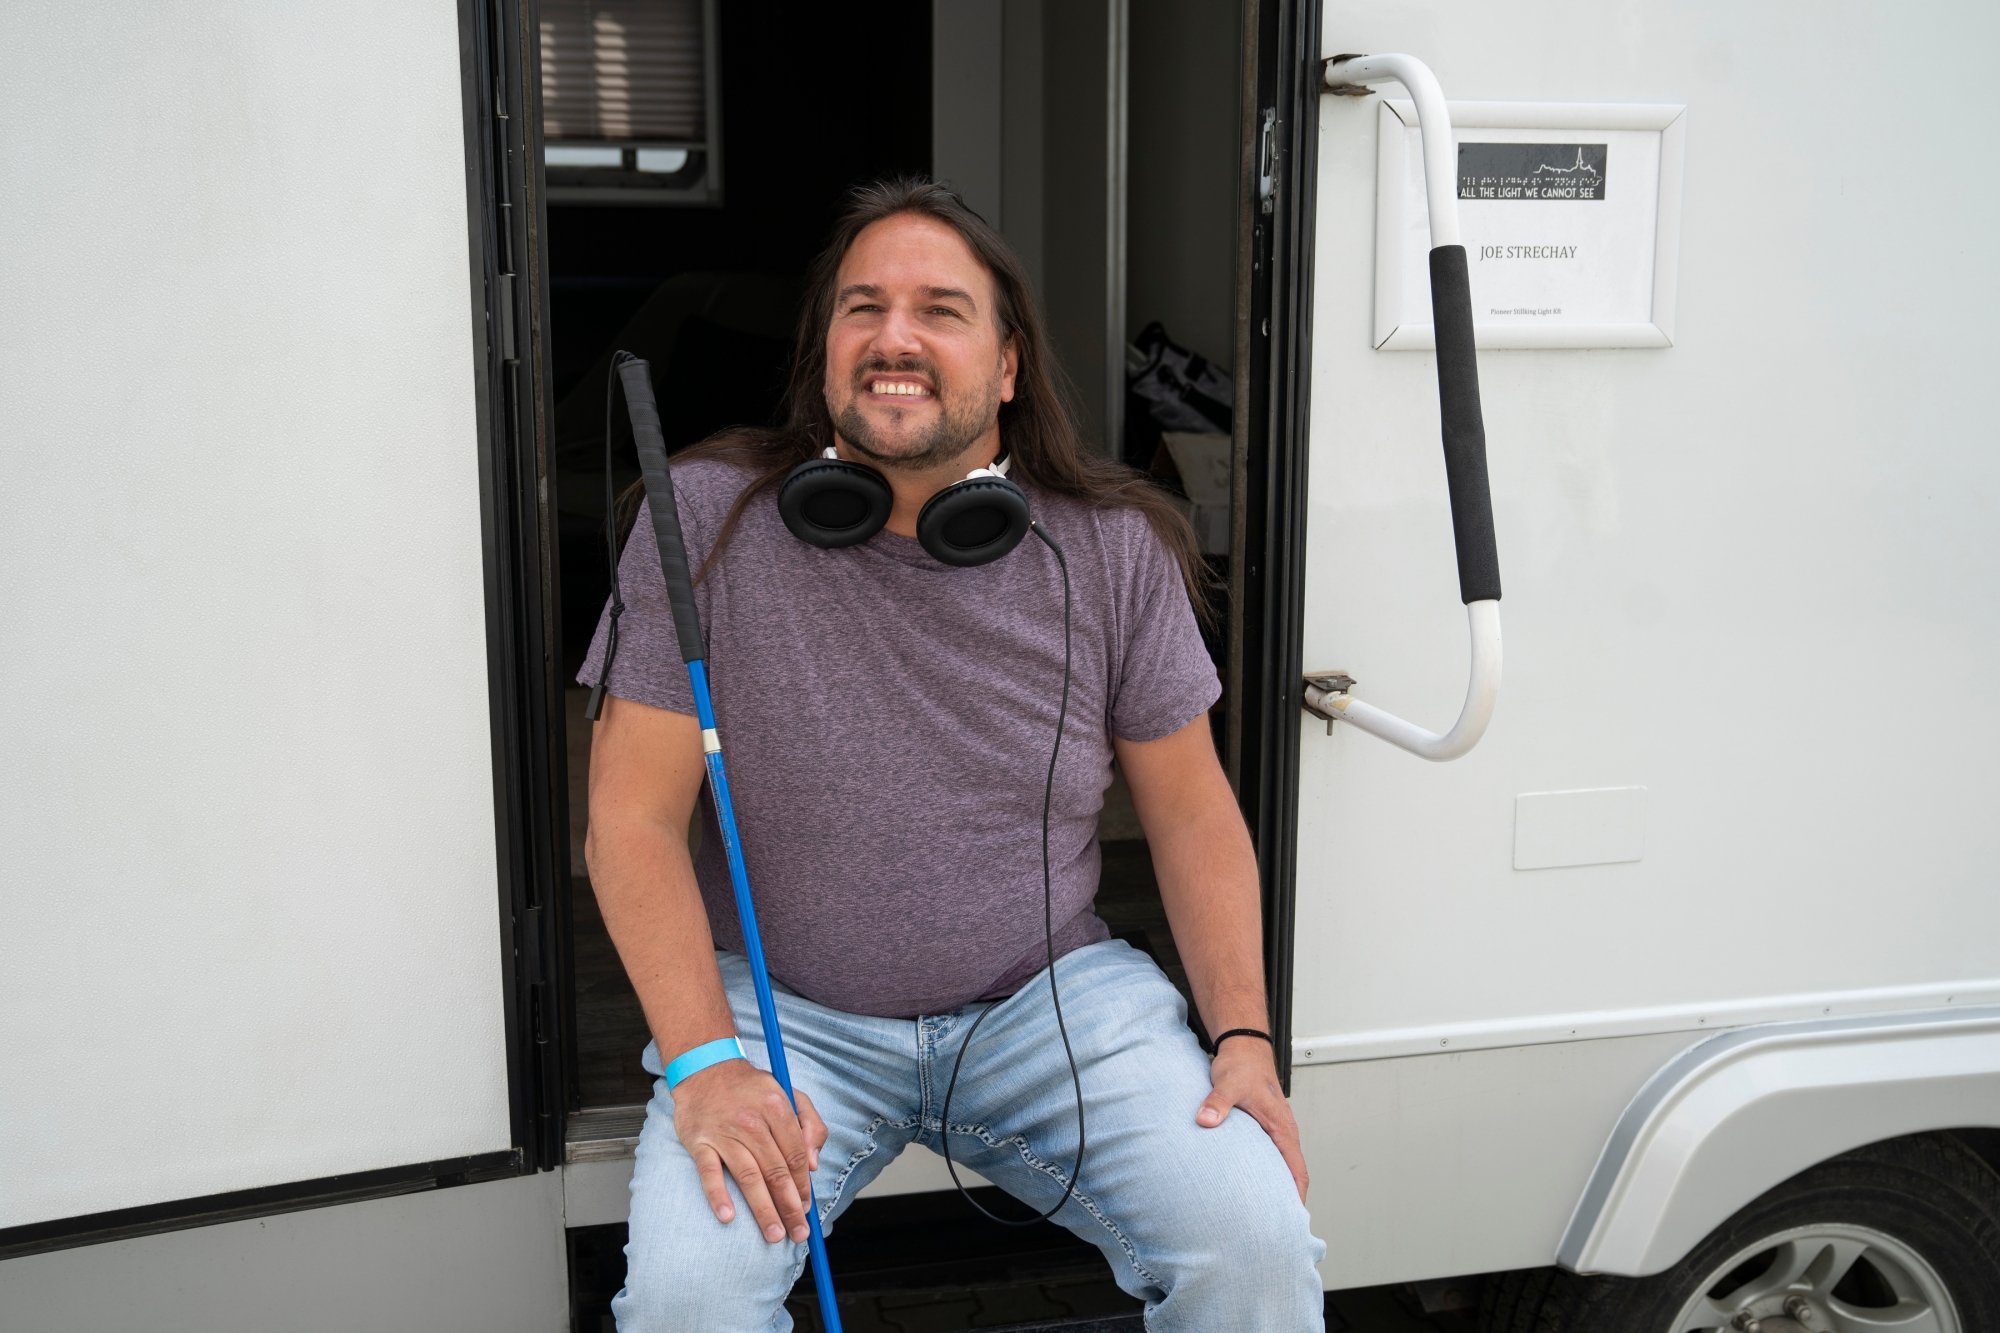 Strechay sits on the steps of a white set trailer. He is smiling at the camera, wearing a pair of large headphones around his neck and holding a blue cane.